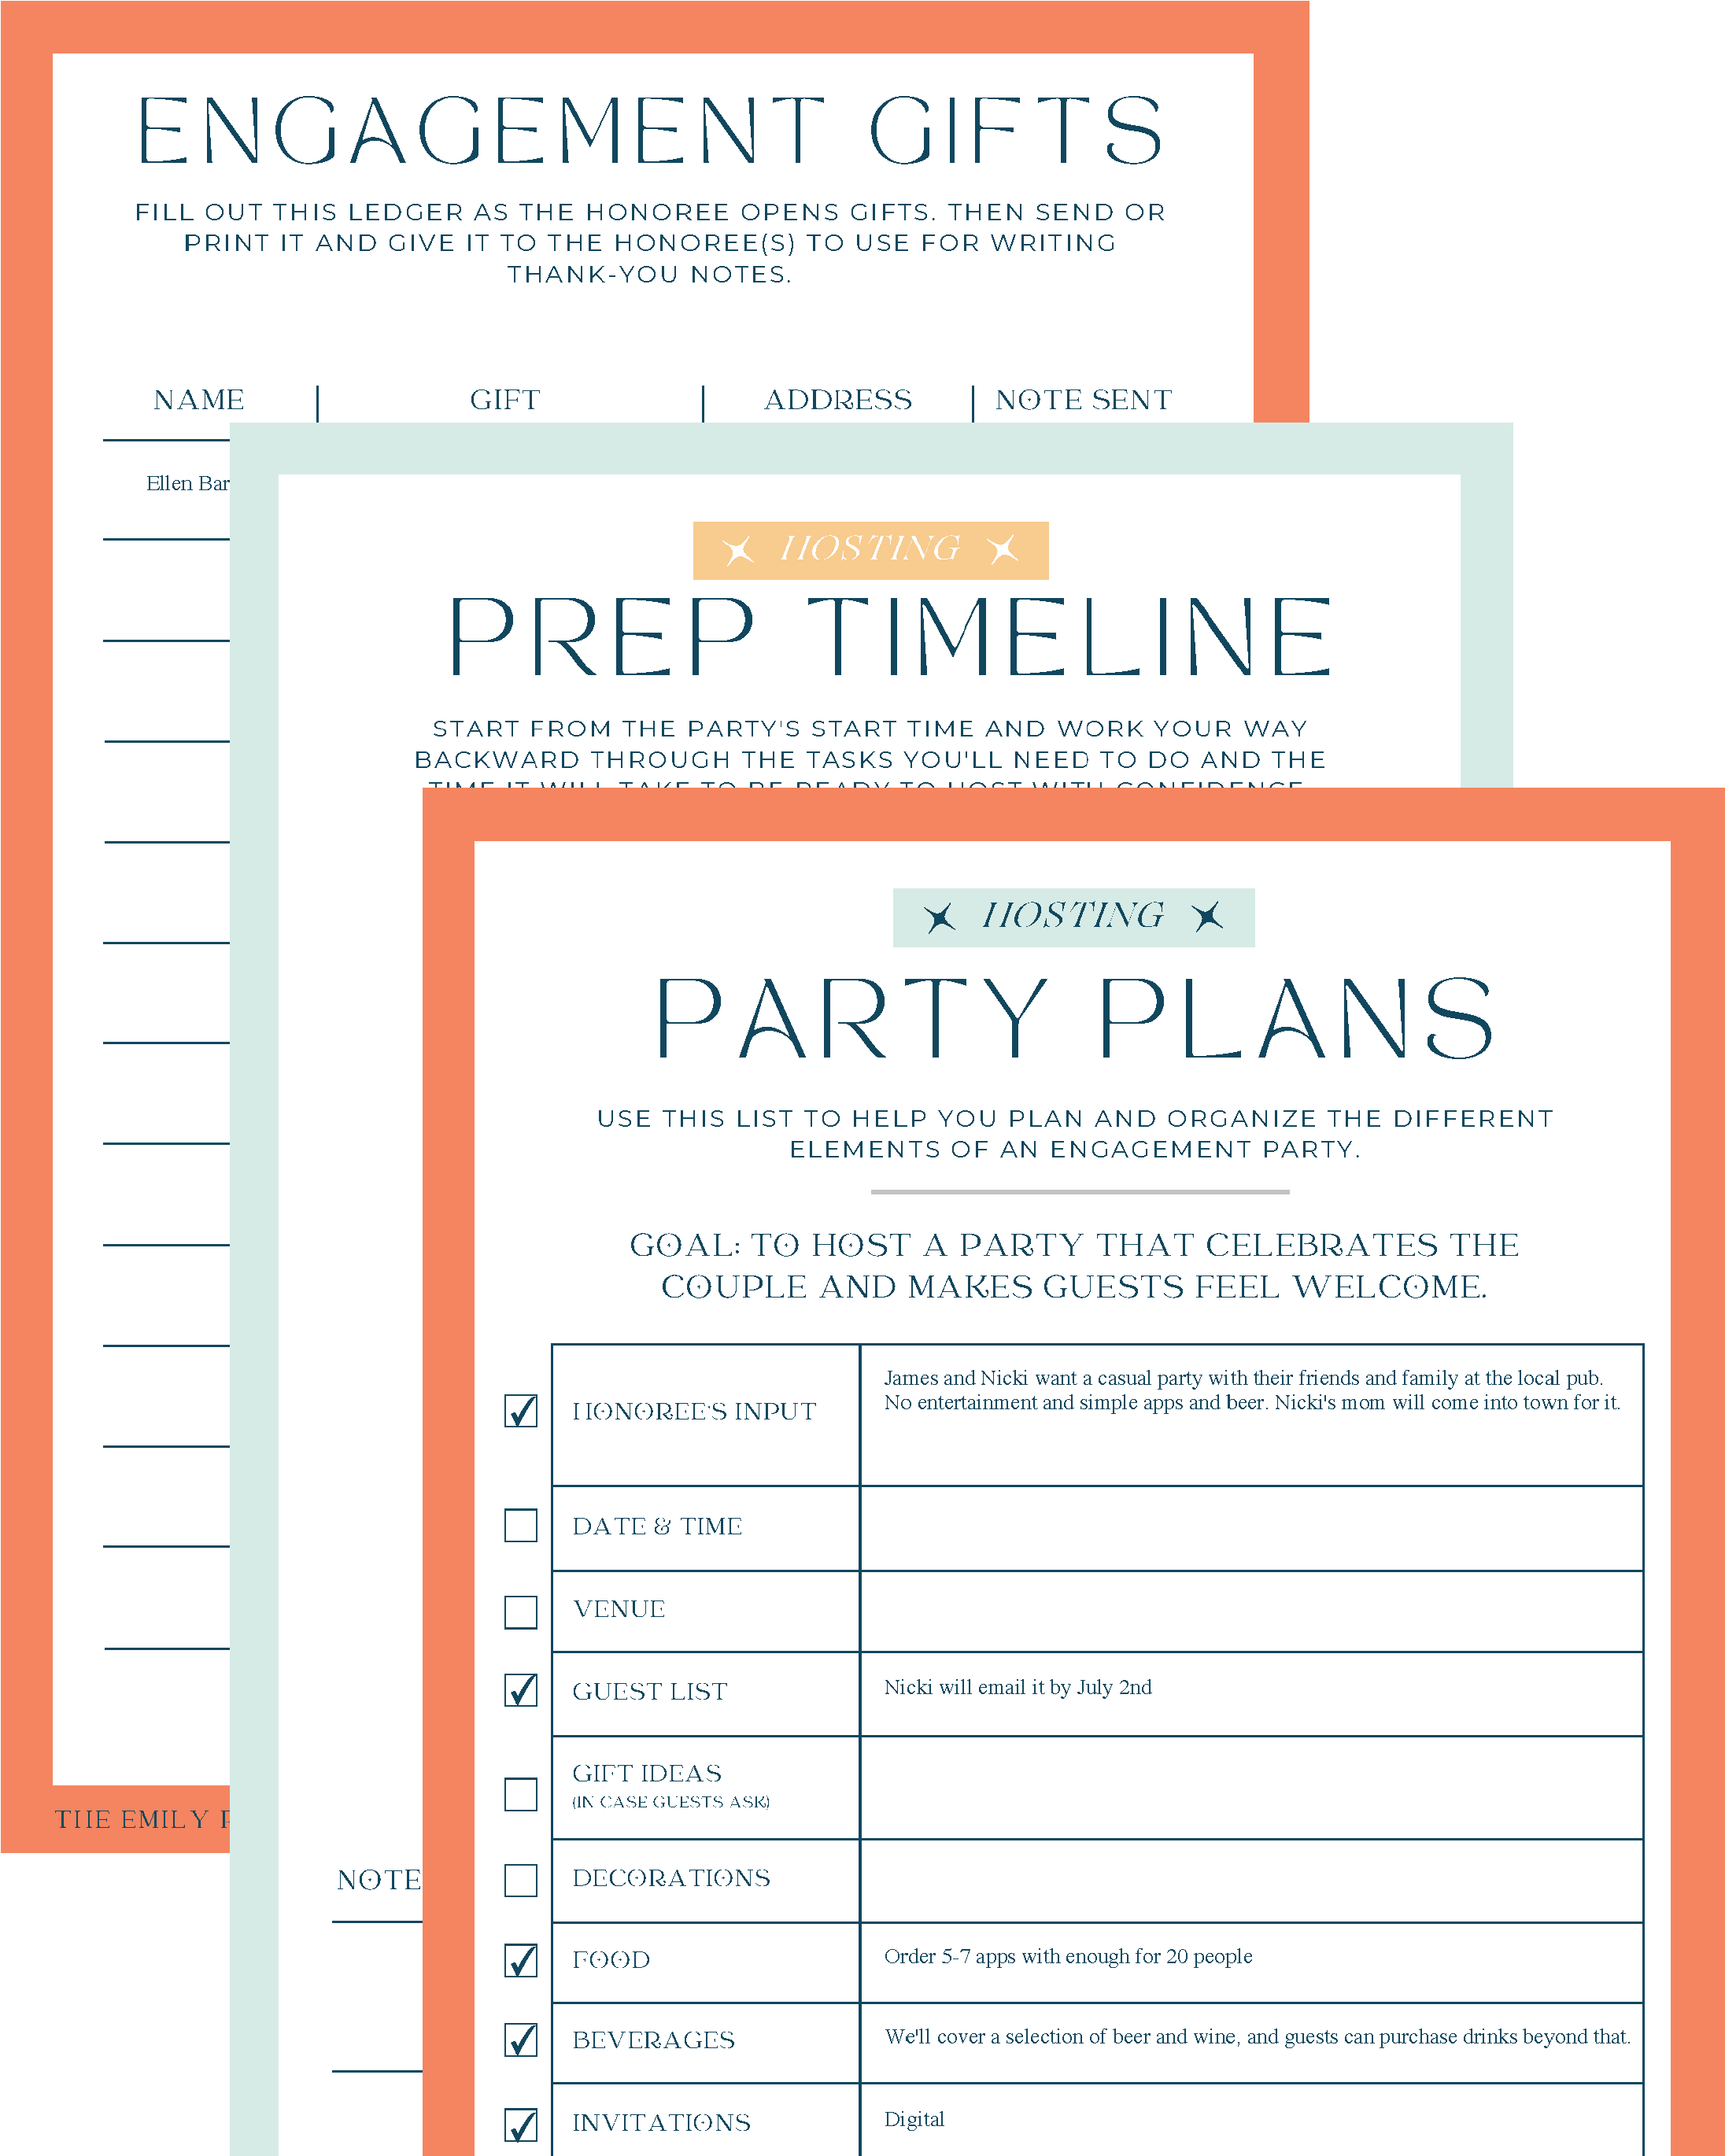 Prom and Party Etiquette